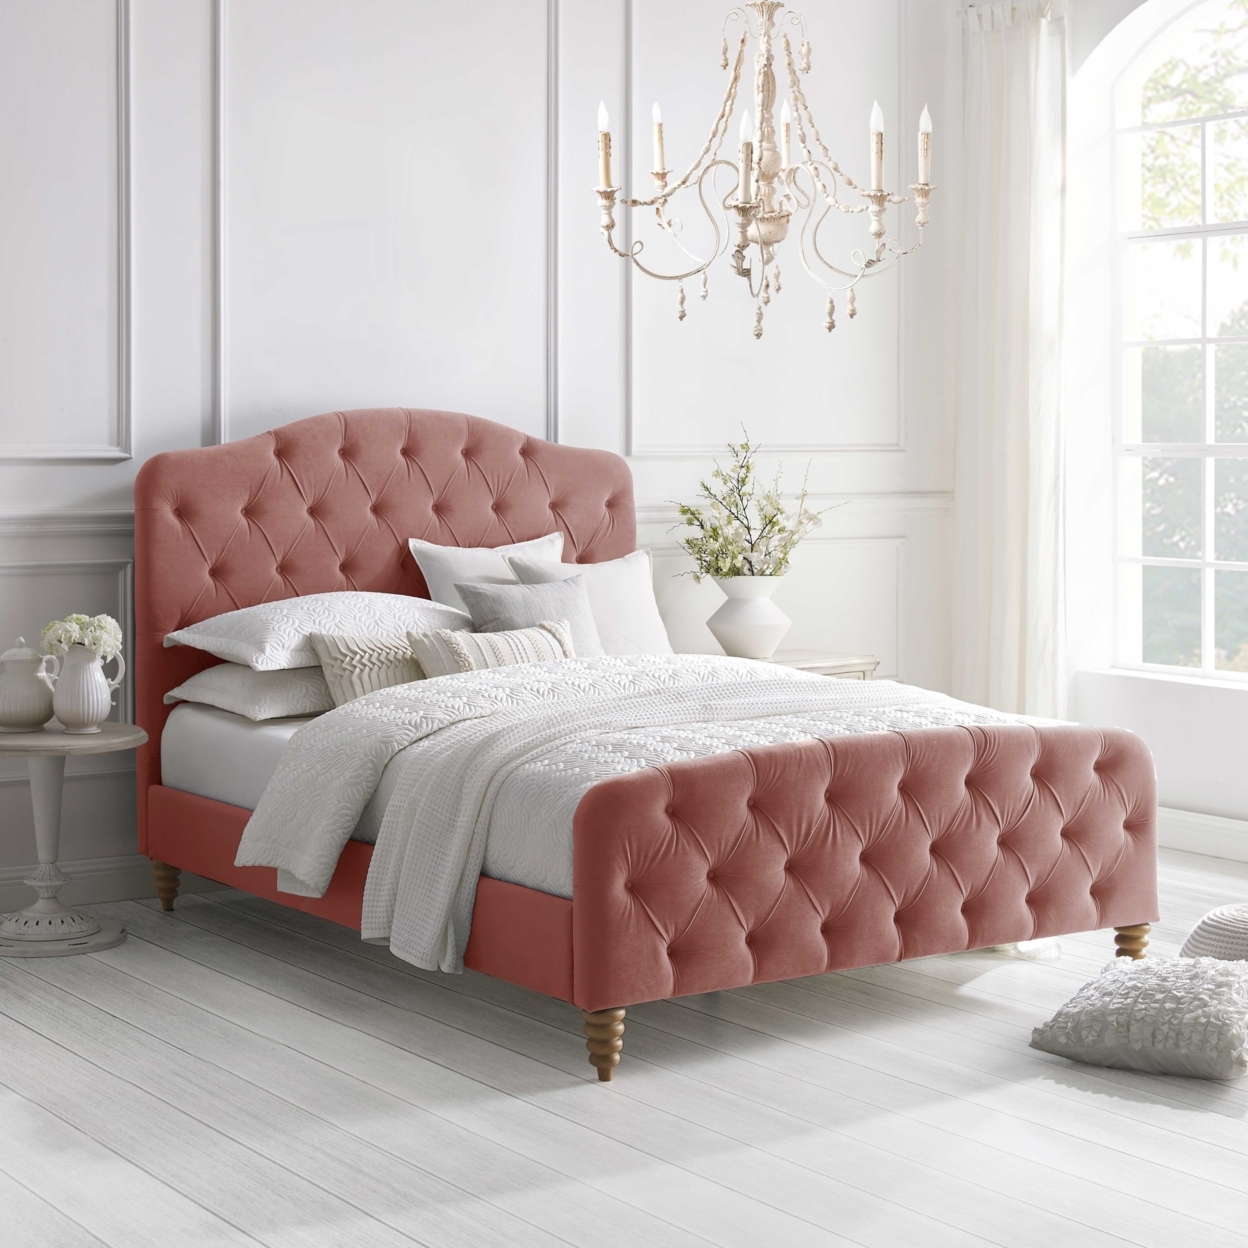 Adilene Bed-Diamond Tufted Headboard And Footboard-Upholstered-Slats Included - Blush, Queen